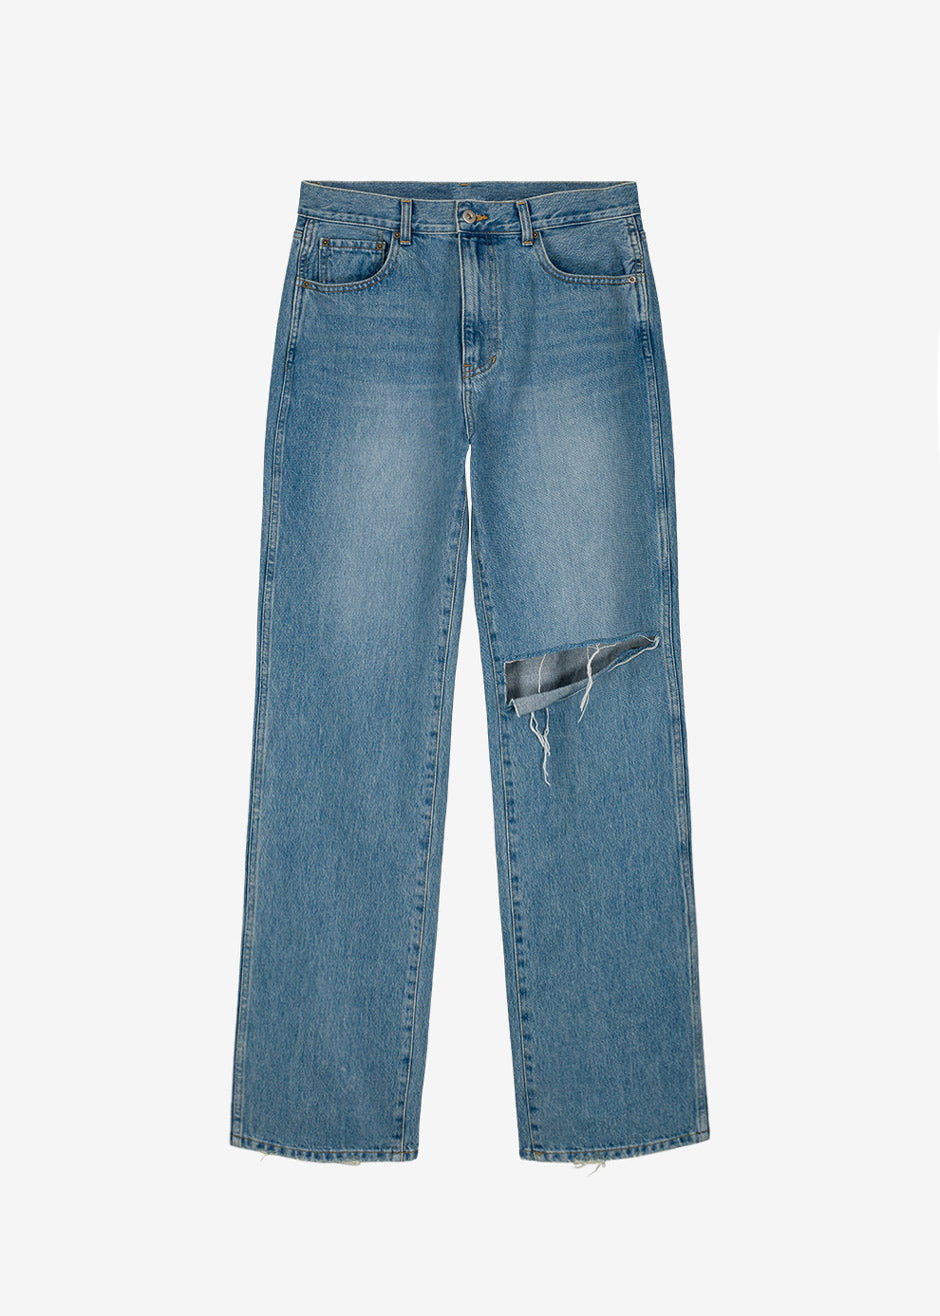 Laon Ripped Jeans - Worn Wash - 9